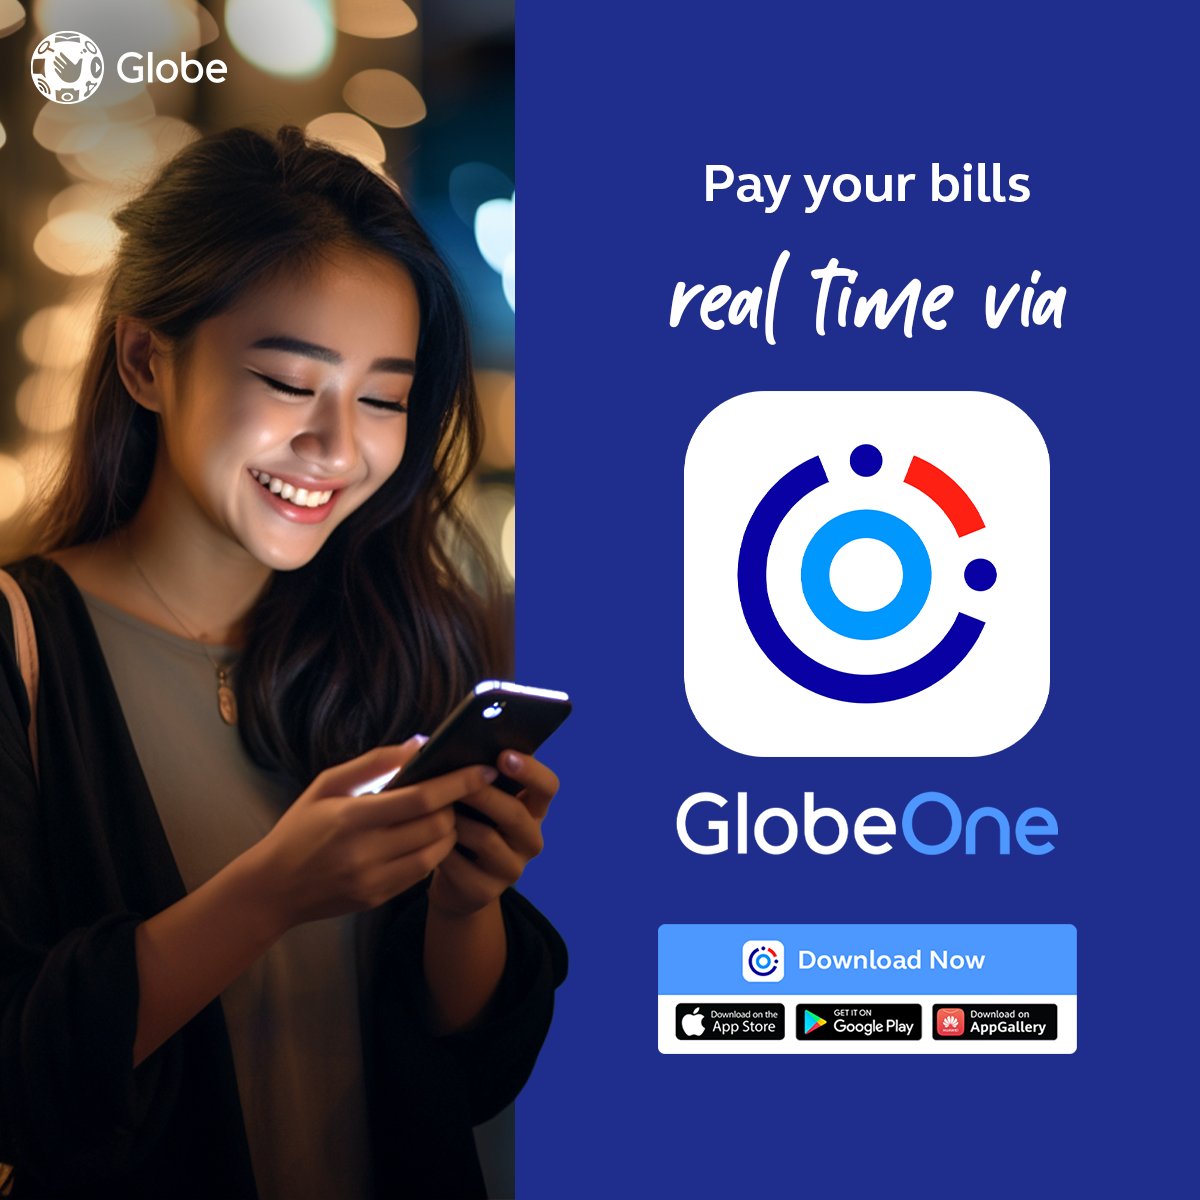 Settle your Globe Postpaid bills seamlessly! 😉 Use the GlobeOne app to pay your bills in real time. Download now at g1.onelink.me/KJve/Pay #AtinAngMundo